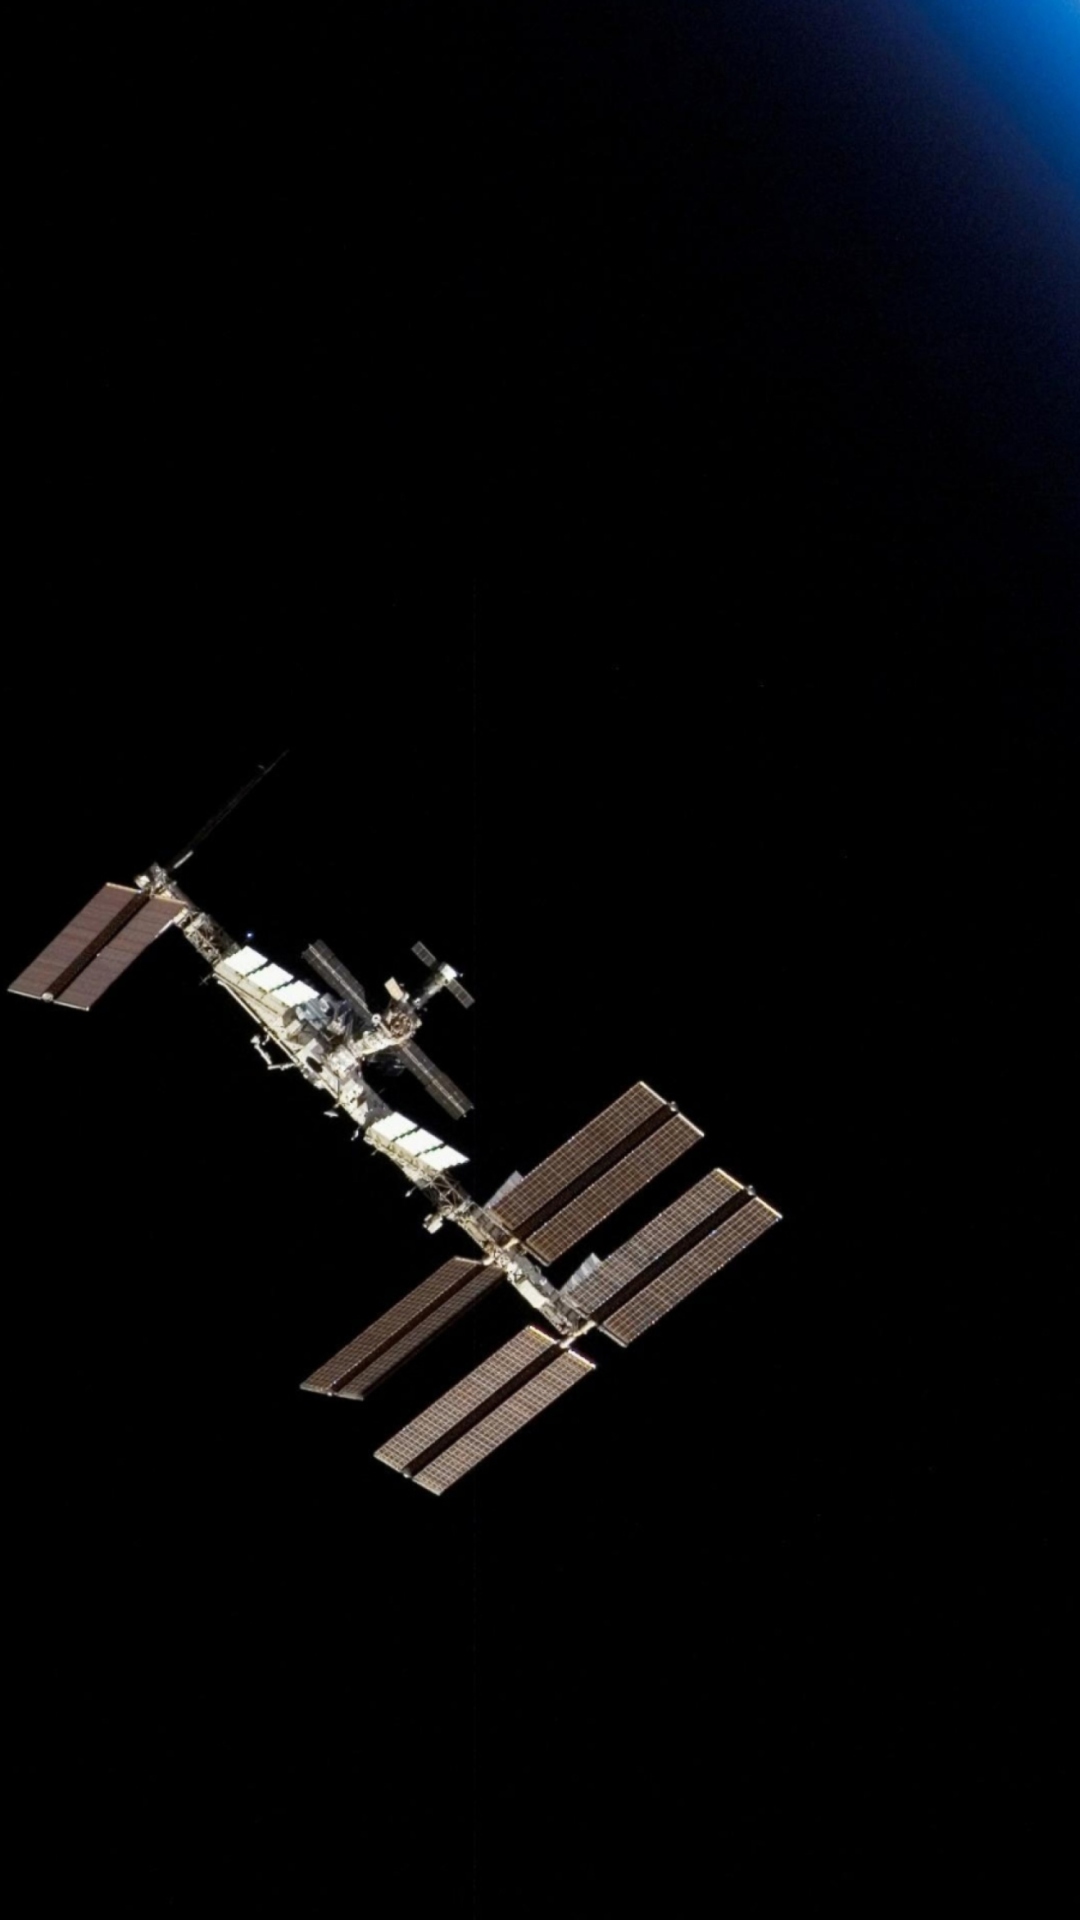 The ISS In Space wallpaper 1080x1920